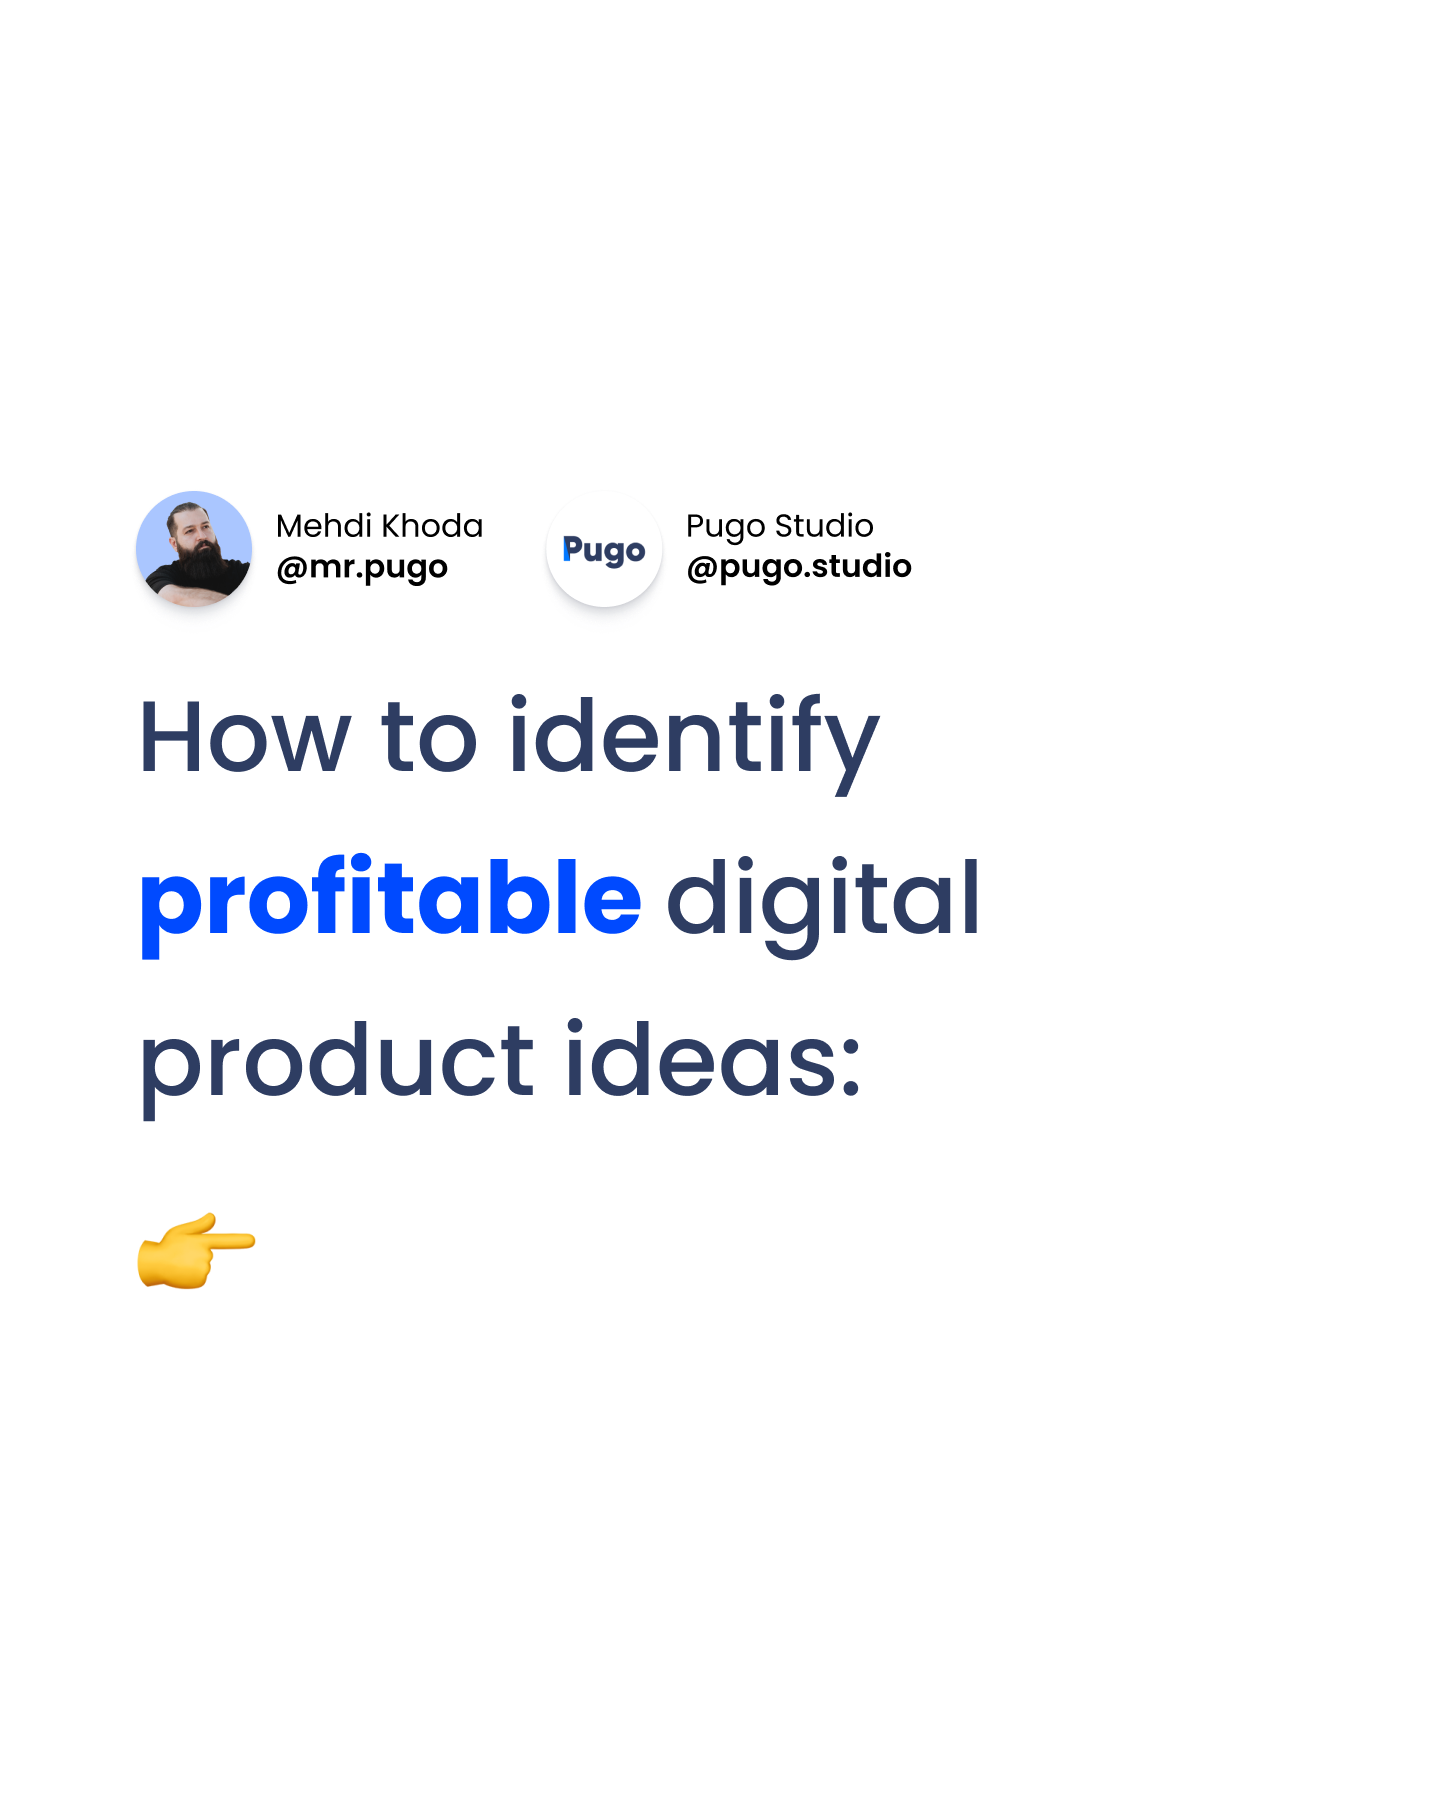 How to identify profitable digital product ideas